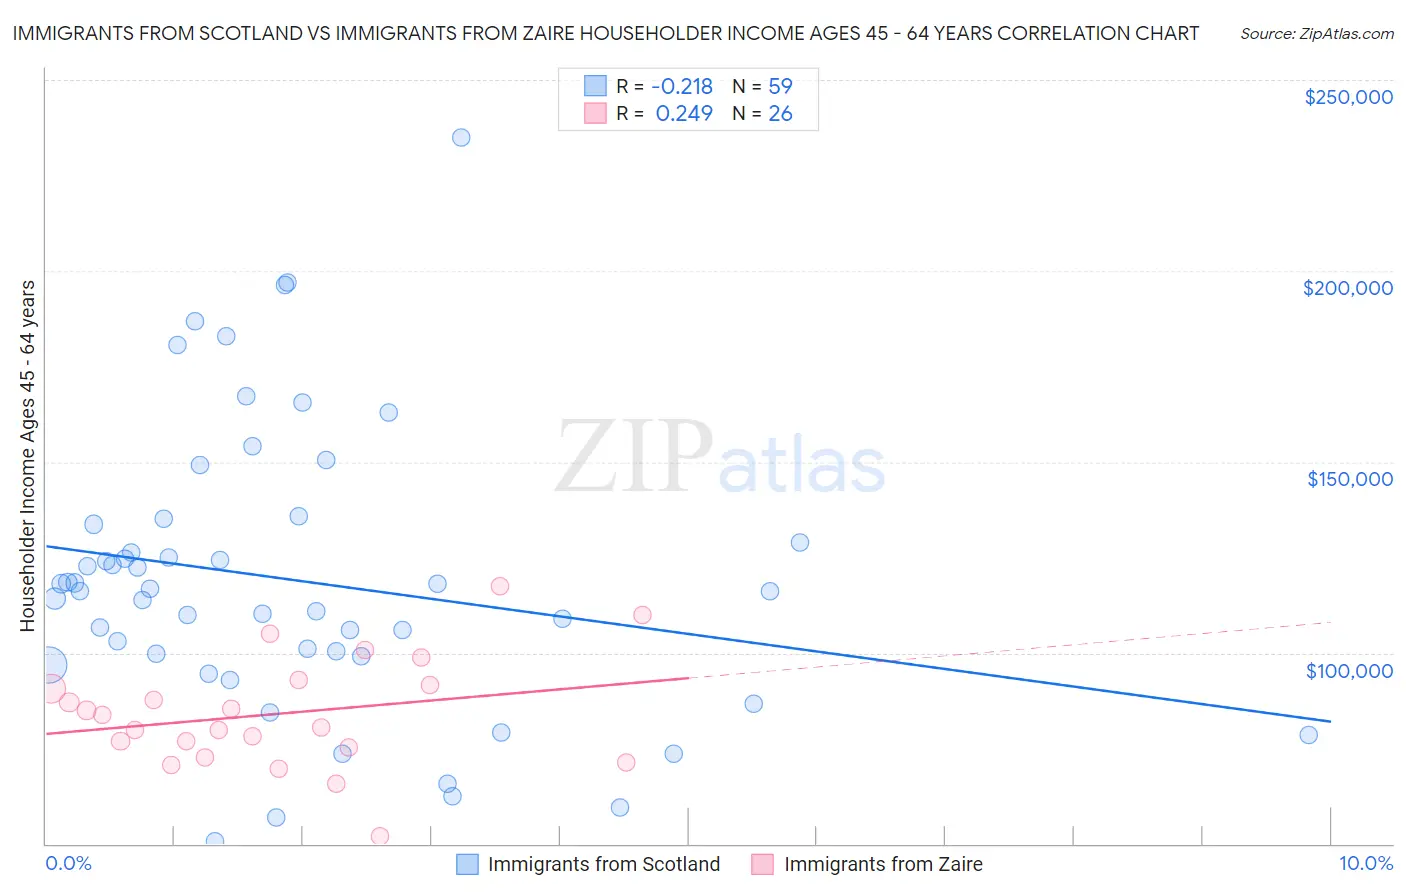 Immigrants from Scotland vs Immigrants from Zaire Householder Income Ages 45 - 64 years